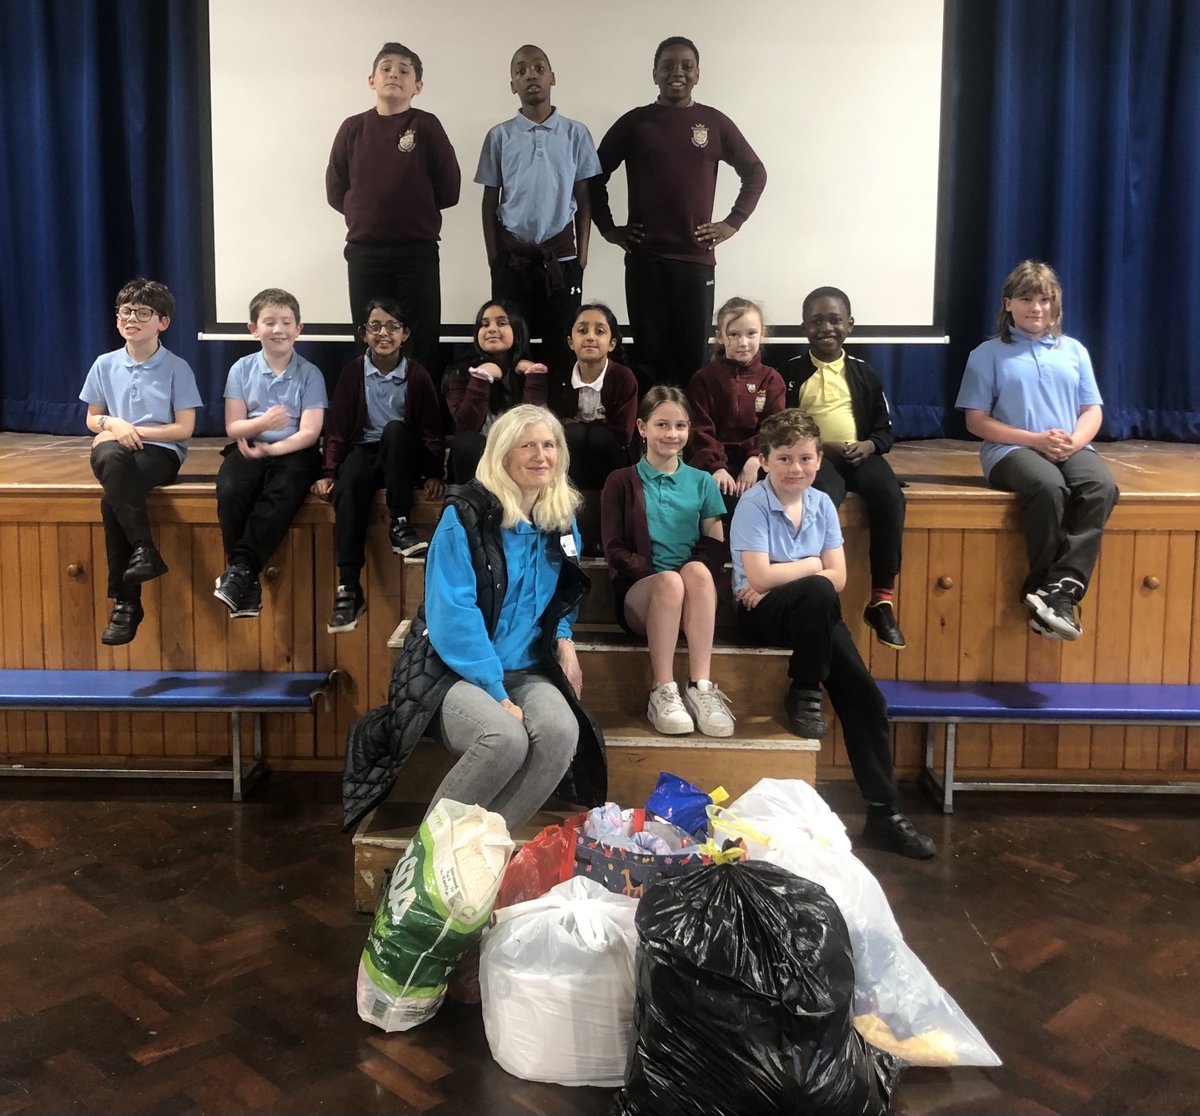 Here are our eco-warriors who have organised a clothing collection. Our school have donated their 'unwanted' clothes to be recycled or reused. We are always looking at ways to protect our environment in our school. #ecowarriors @fairfutures1 #thesycamoretrust